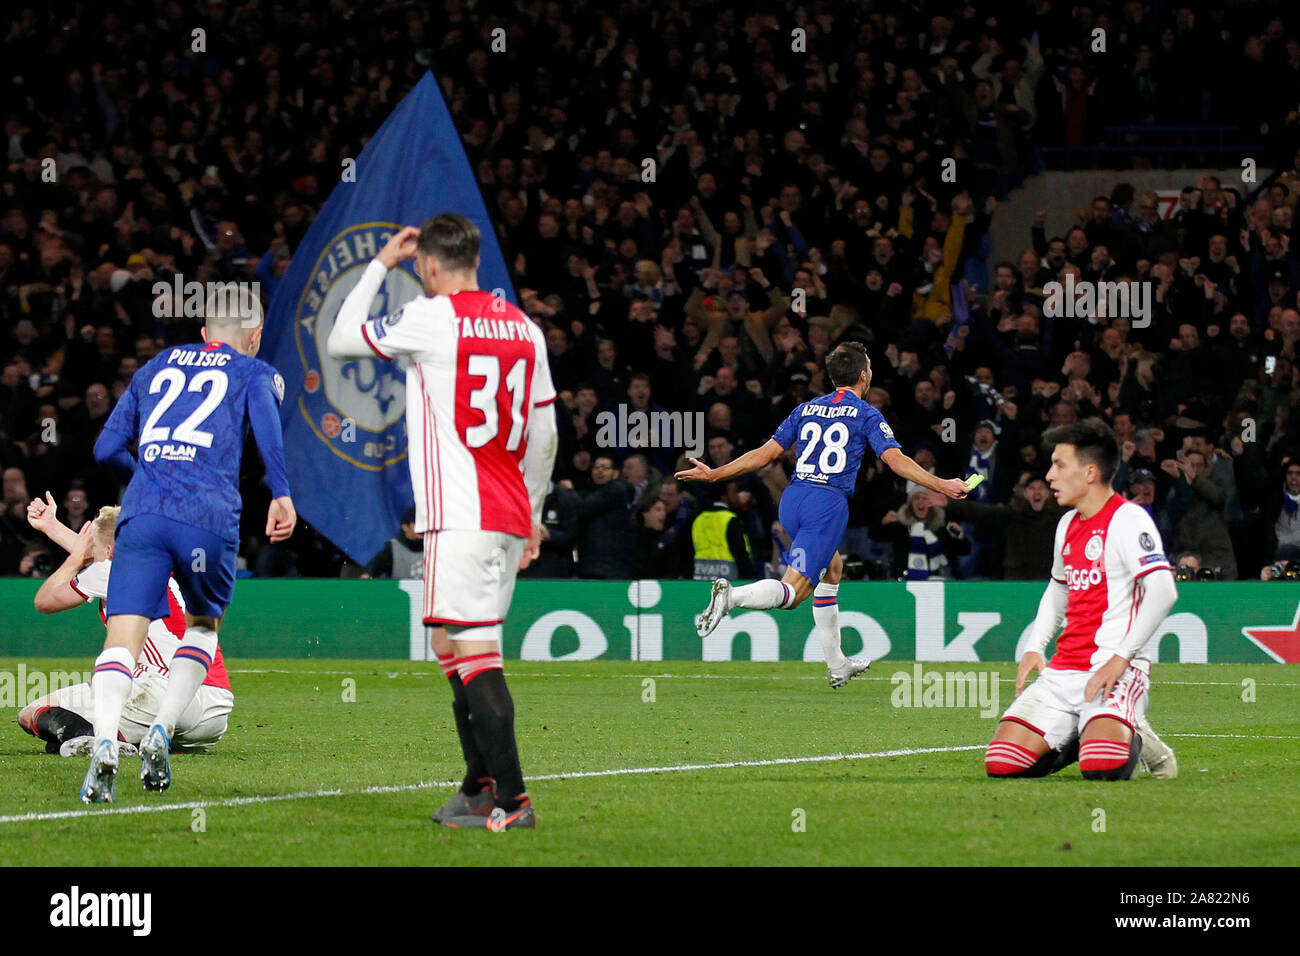 London, UK. 05th Nov, 2019. GOAL - Csar Azpilicueta of Chelsea scores the fourth goal during the UEFA Champions League group match between Chelsea and Ajax at Stamford Bridge, London, England on 5 November 2019. Photo by Carlton Myrie/PRiME Media Images. Credit: PRiME Media Images/Alamy Live News Stock Photo